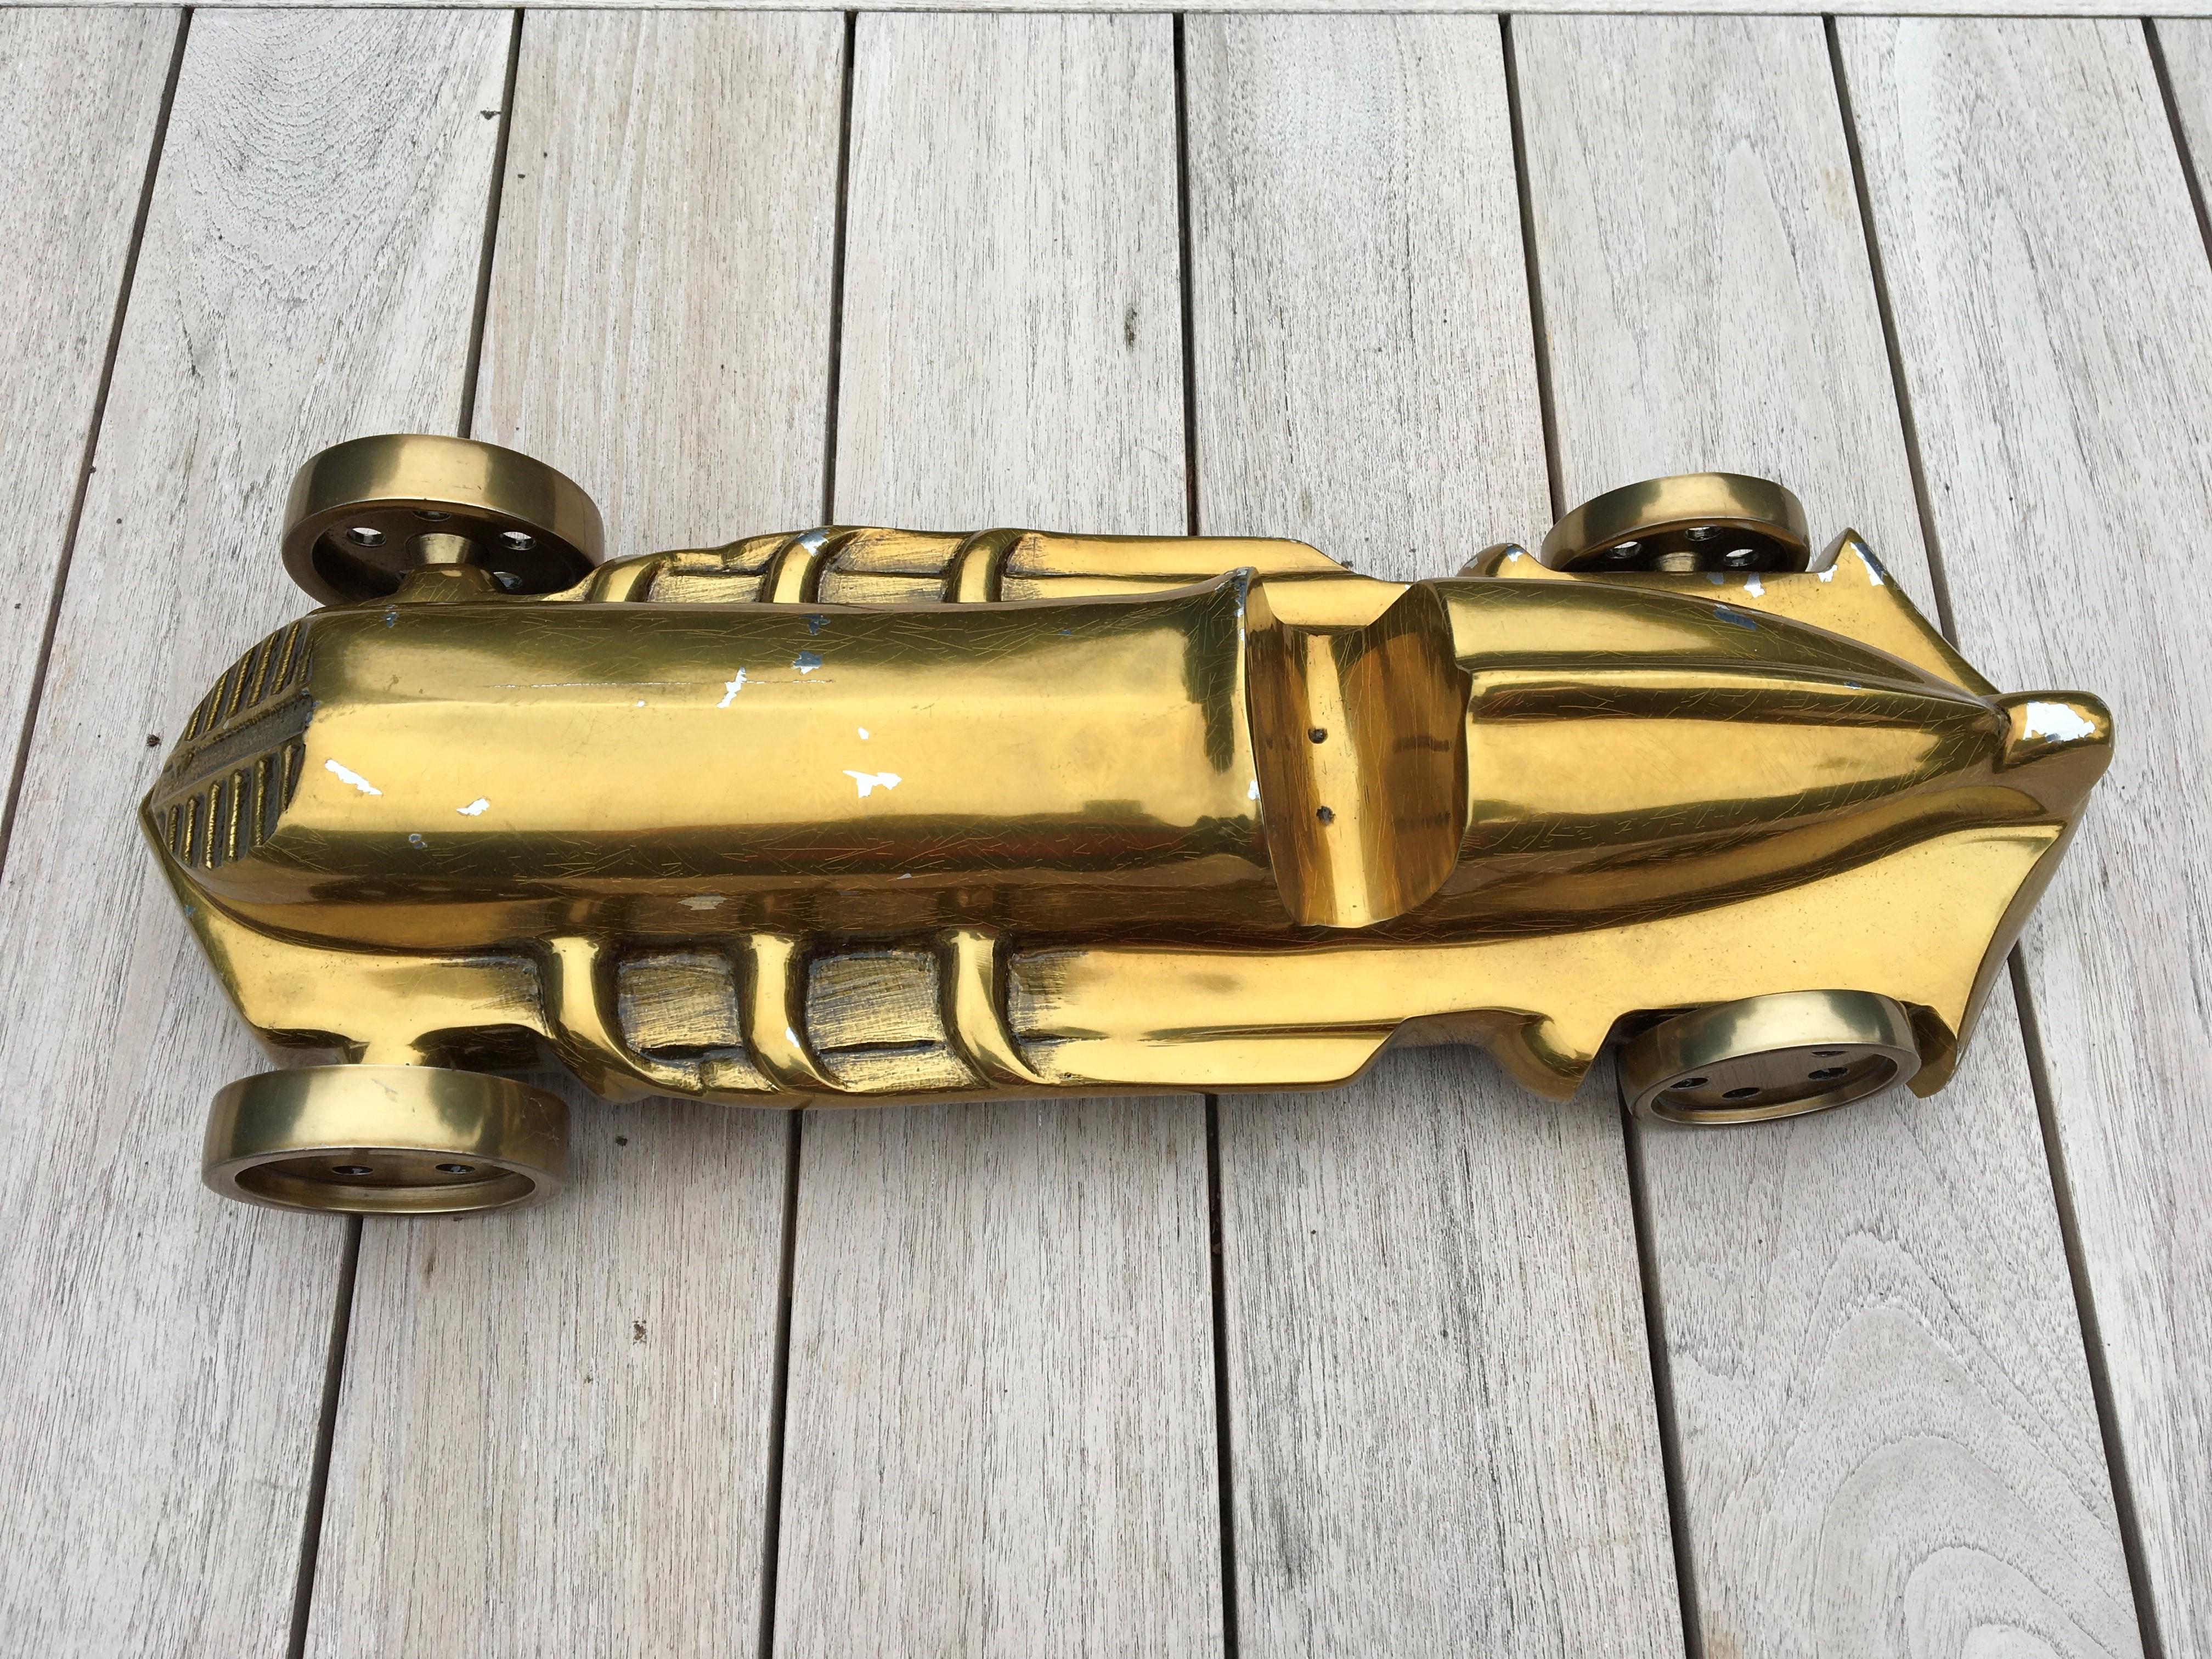 Industrial Large Racing Car Model, Polished Aluminium with Gold Finish